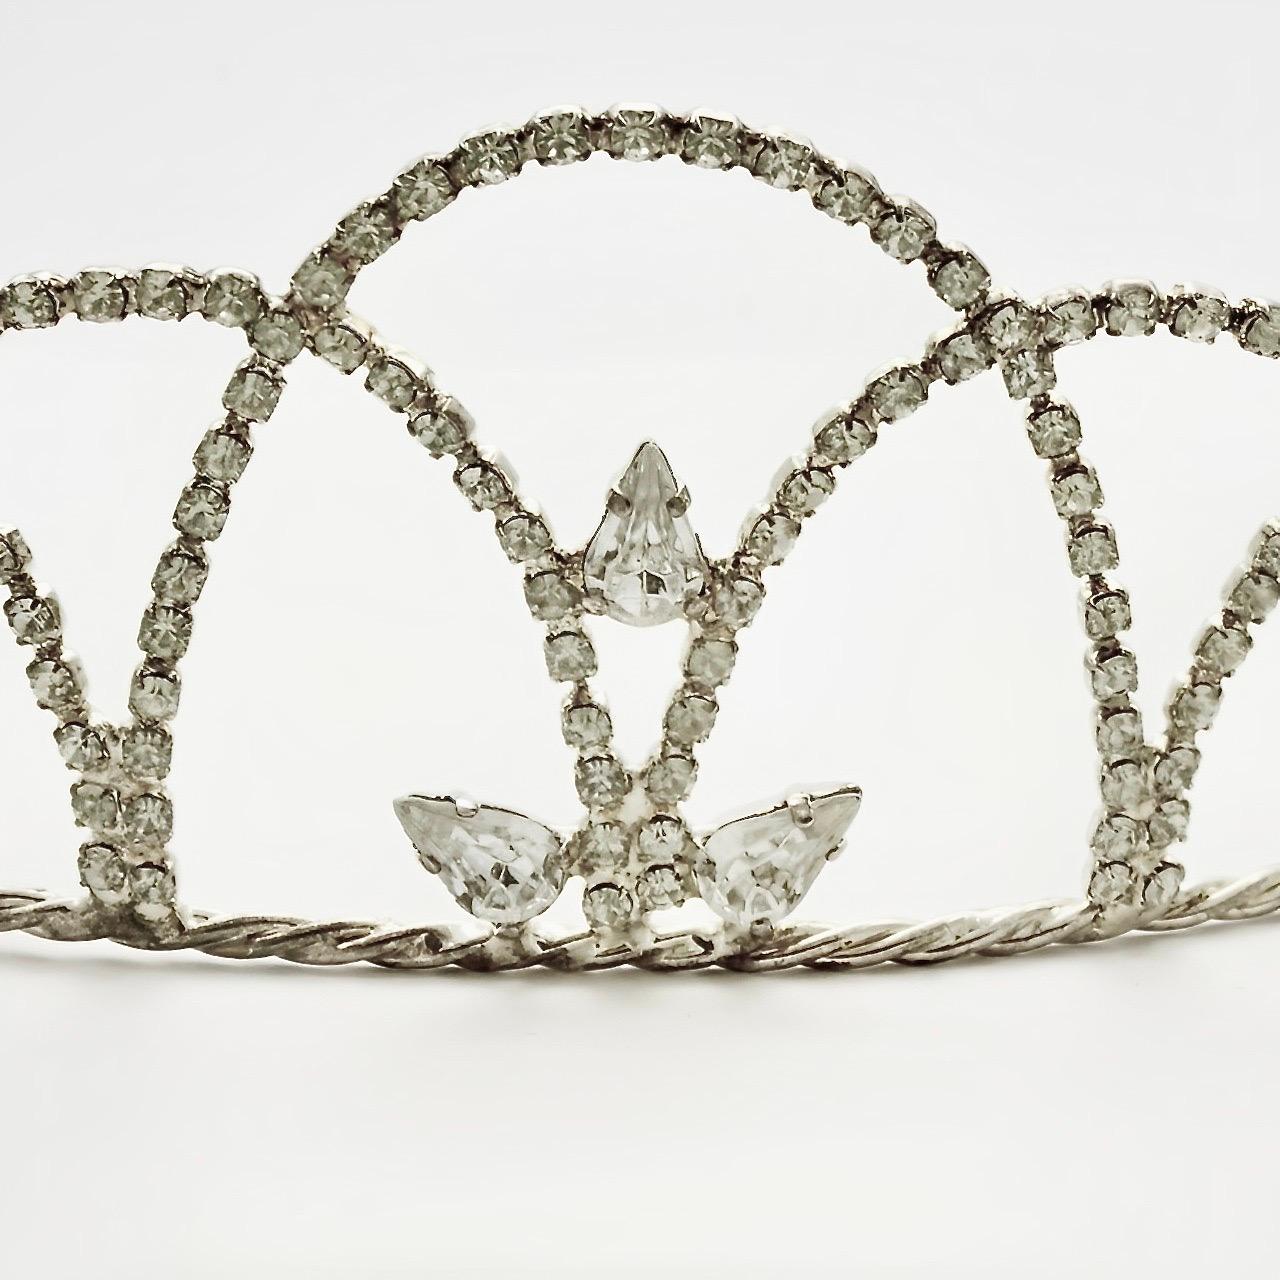 
Wonderful silver plated tiara with a rope twist band and featuring clear faceted rhinestones. Measuring height at the front 4.7 cm / 1.85 inches, the rhinestones are all prong set. The tiara is in very good condition, there is very little wear to